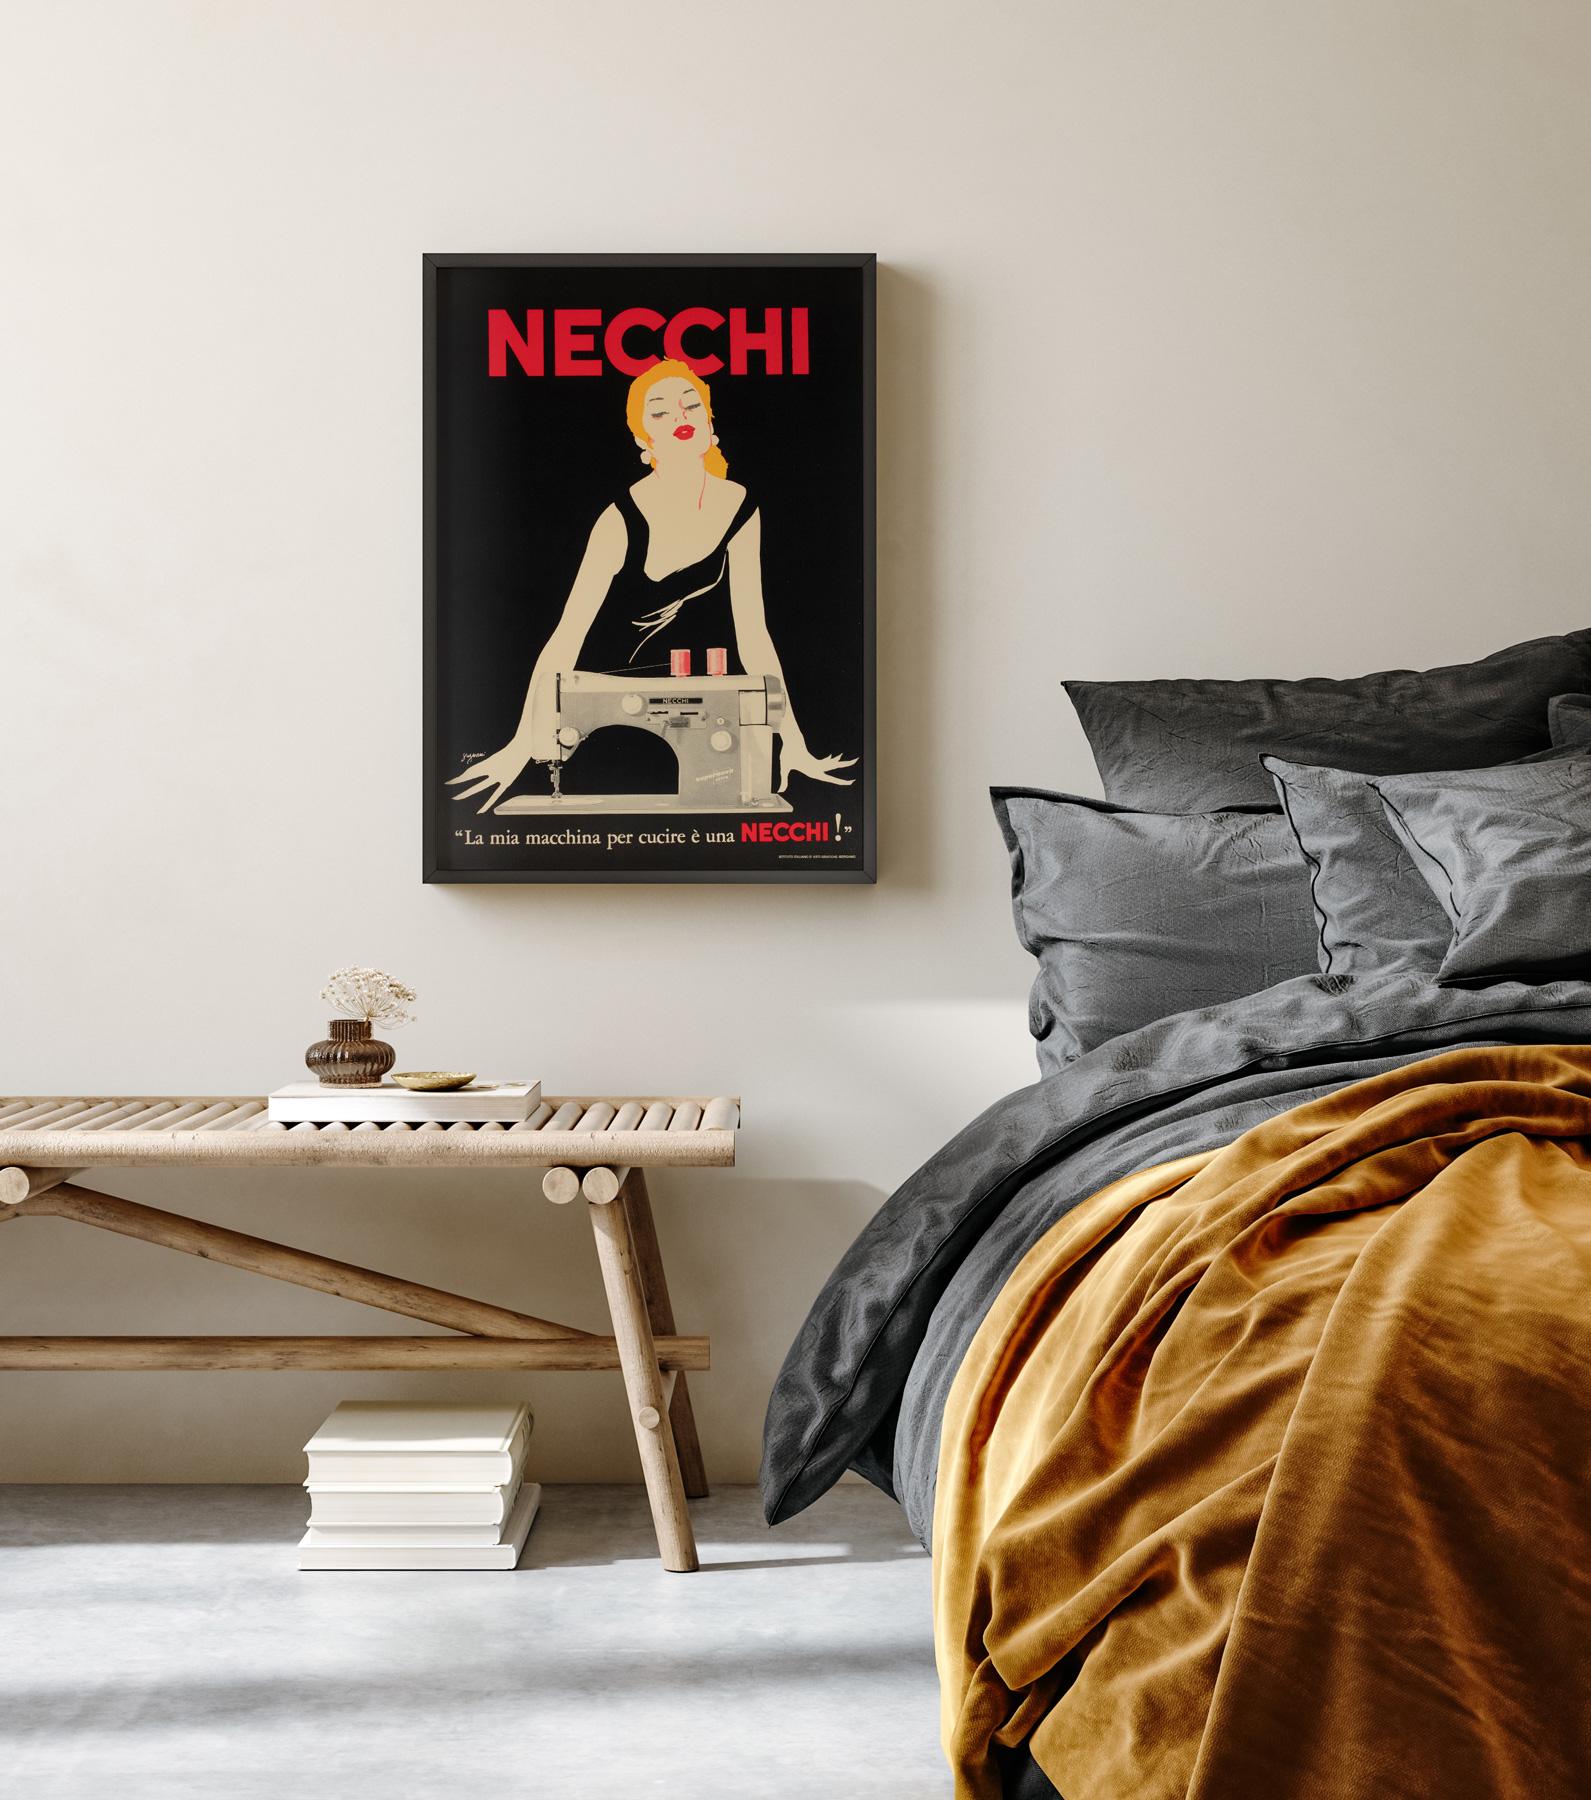 We love this 1980s Italian advertising poster for sewing machine brand Necchi. Sewing has never looked more fabulous!

This vintage poster has been professionally linen-backed and is sized 13 1/2 x 18 3/4 inches (plus a little with the linen). It